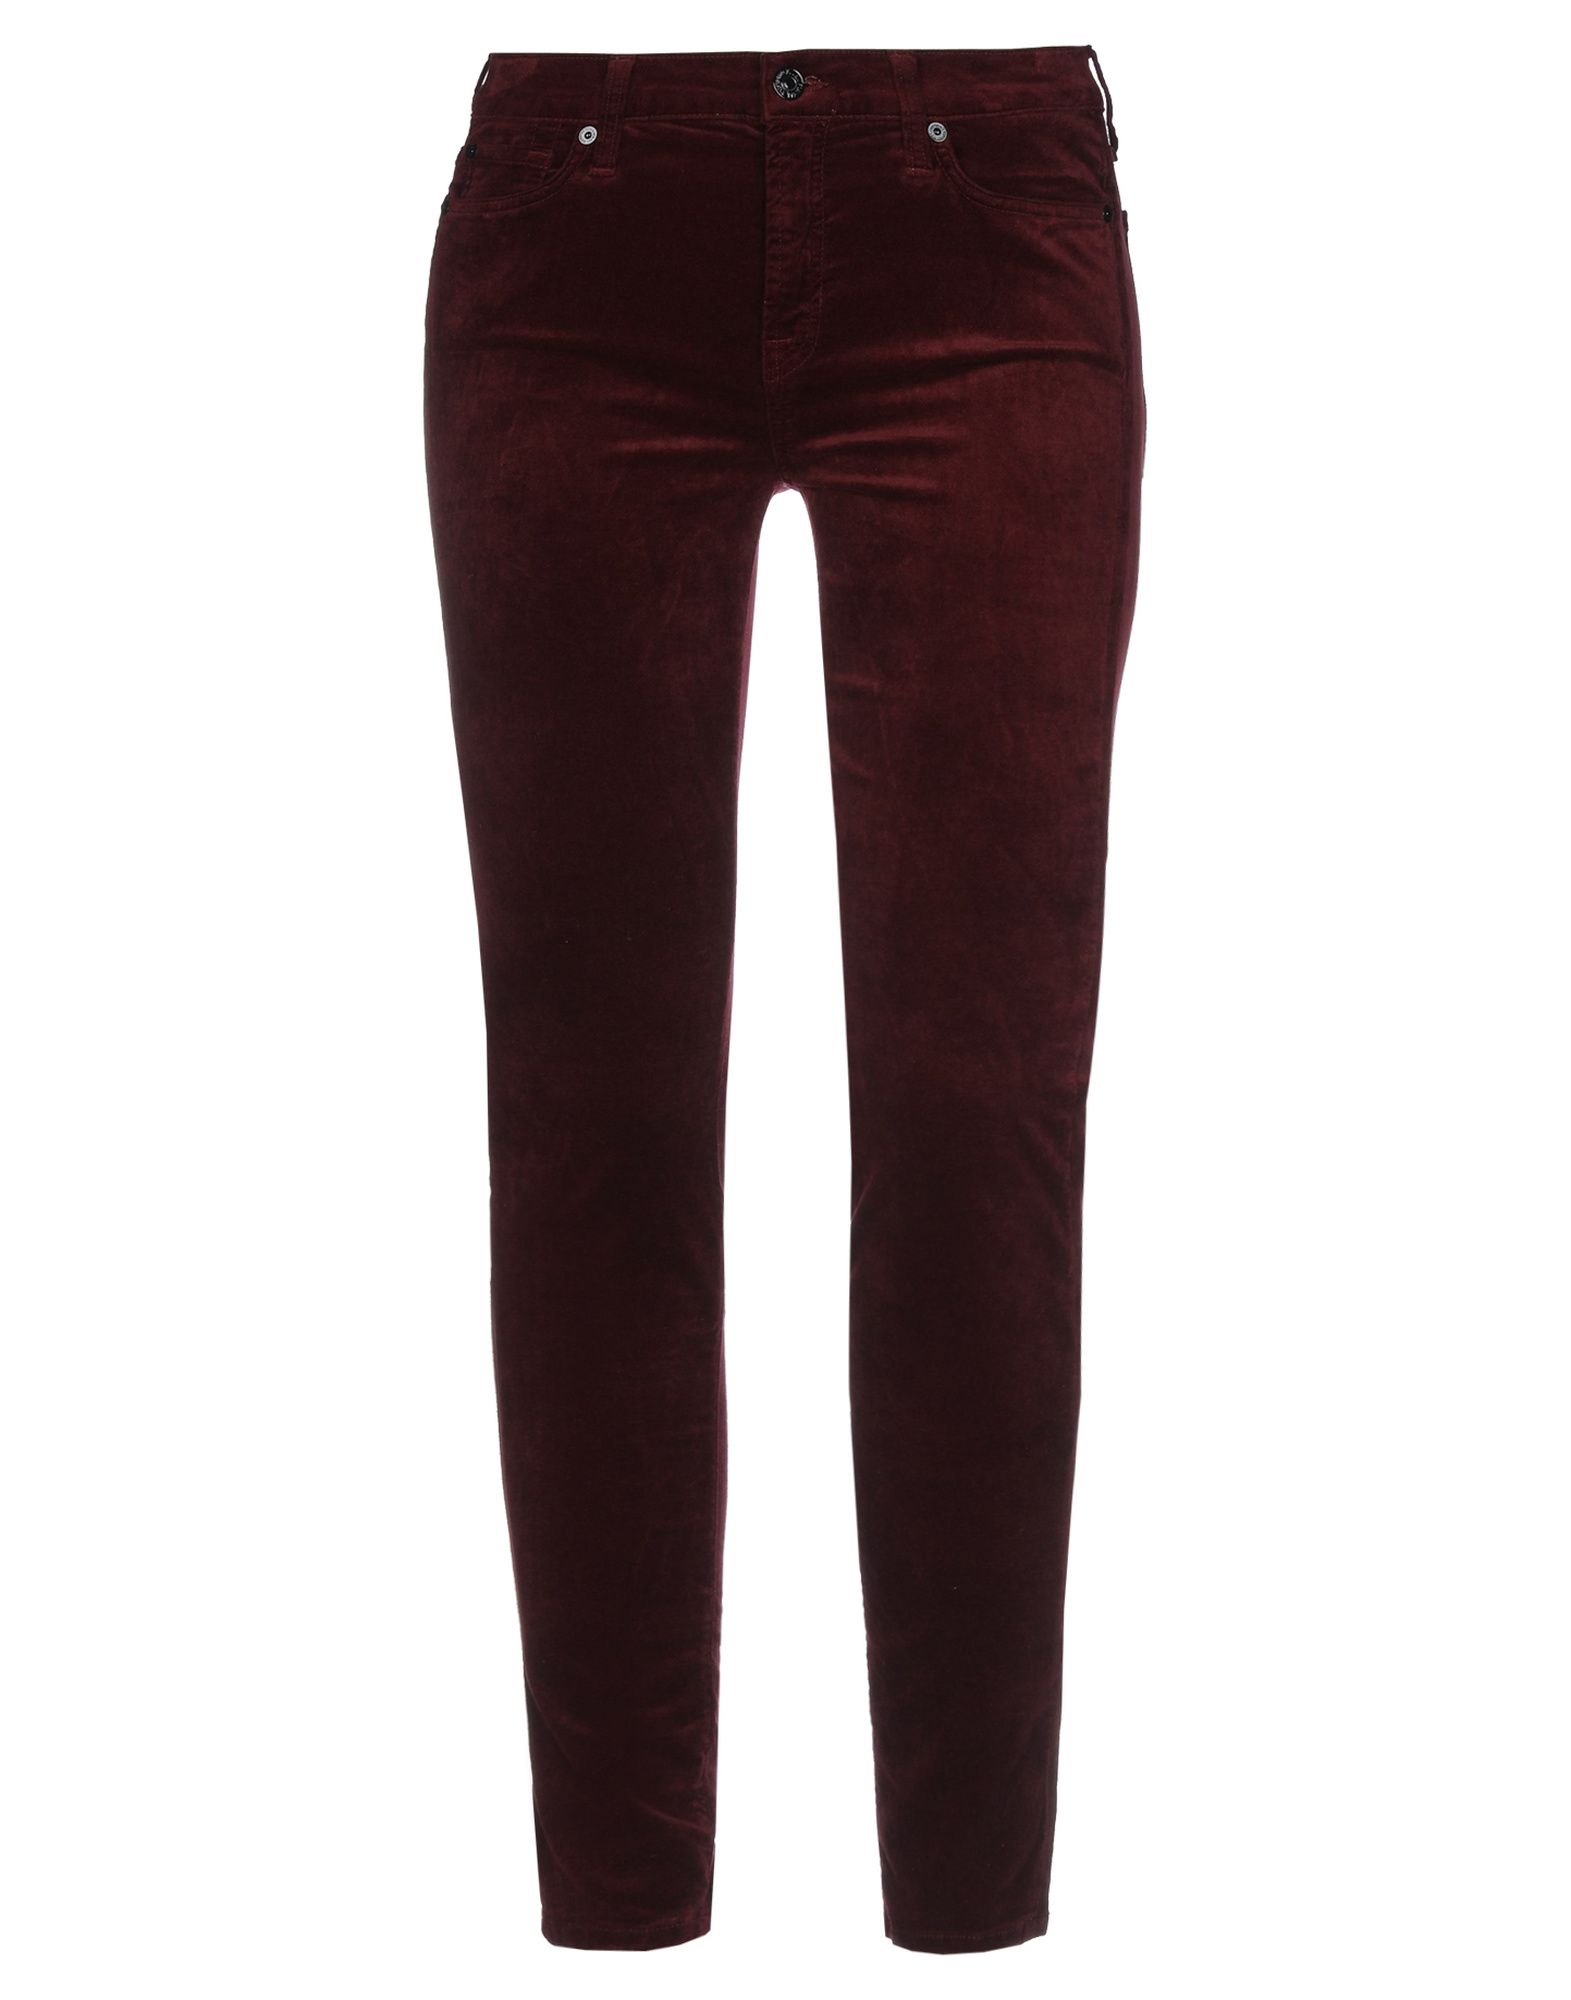 7 FOR ALL MANKIND Hose Damen Bordeaux von 7 FOR ALL MANKIND